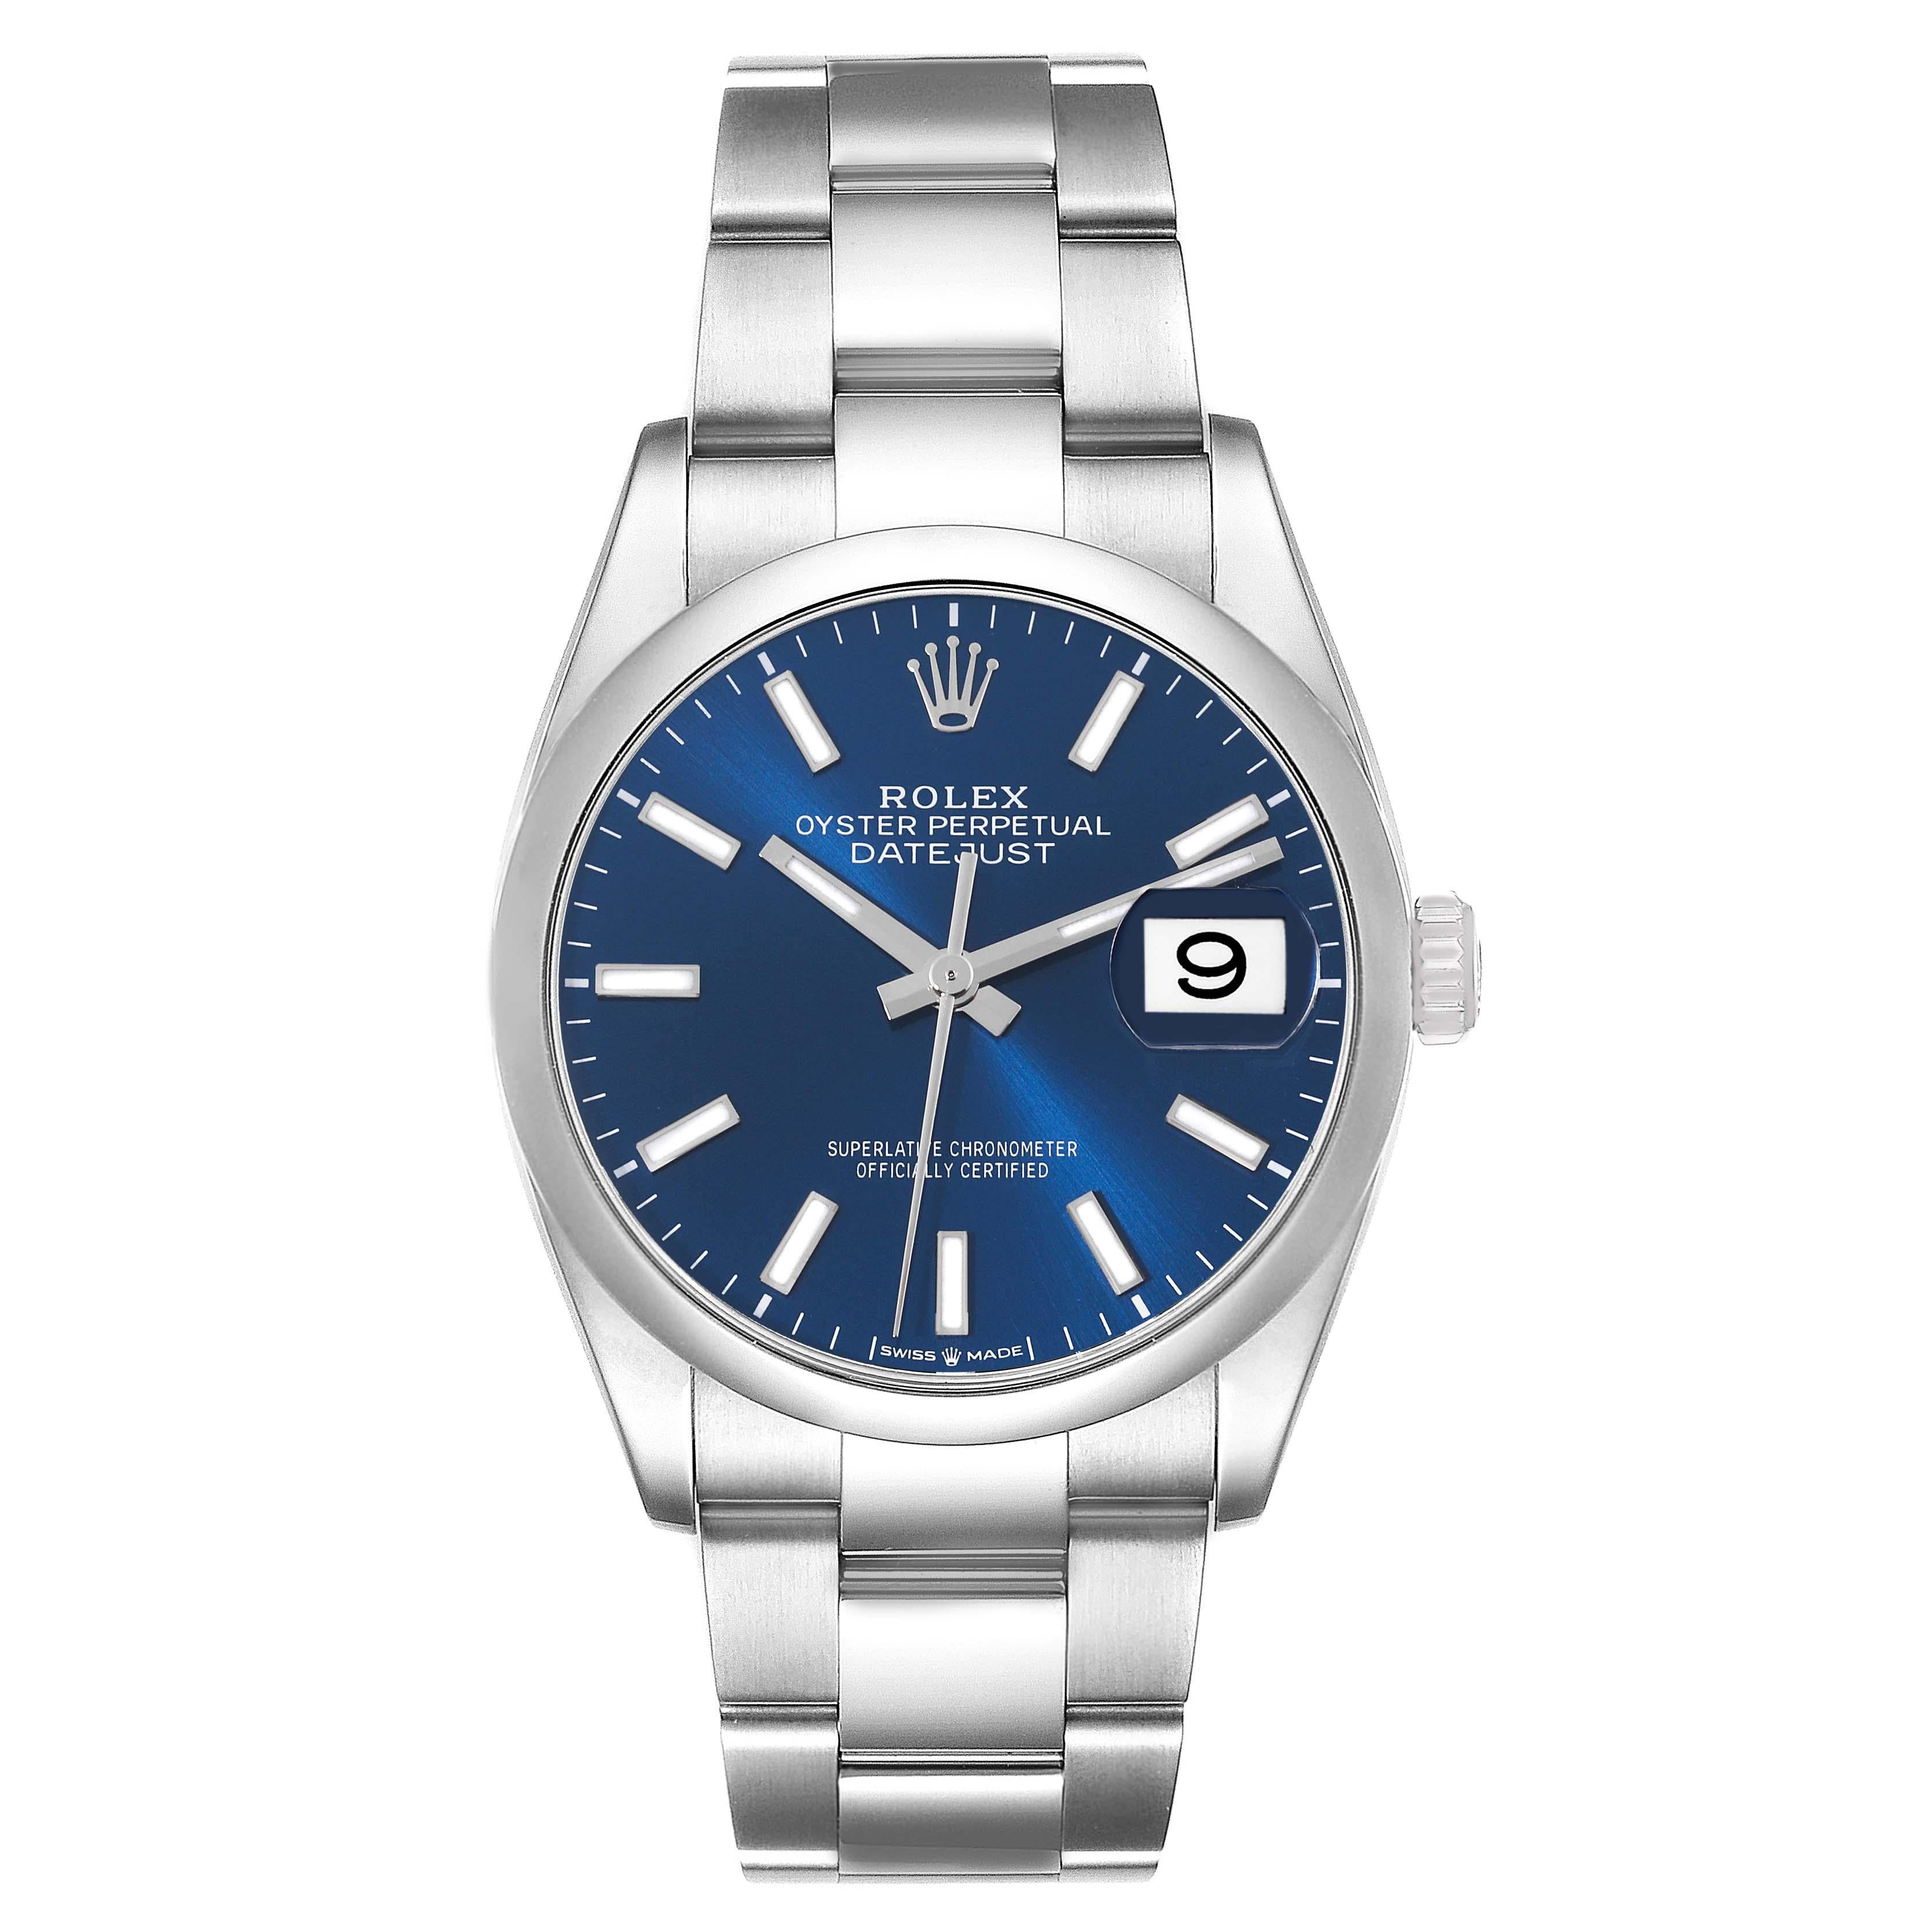 Rolex Datejust 36 Blue Dial Domed Bezel Steel Mens Watch 126200 Box Card. Officially certified chronometer self-winding movement. Stainless steel case 36.0 mm in diameter. Rolex logo on a crown. Stainless steel smooth domed bezel. Scratch resistant